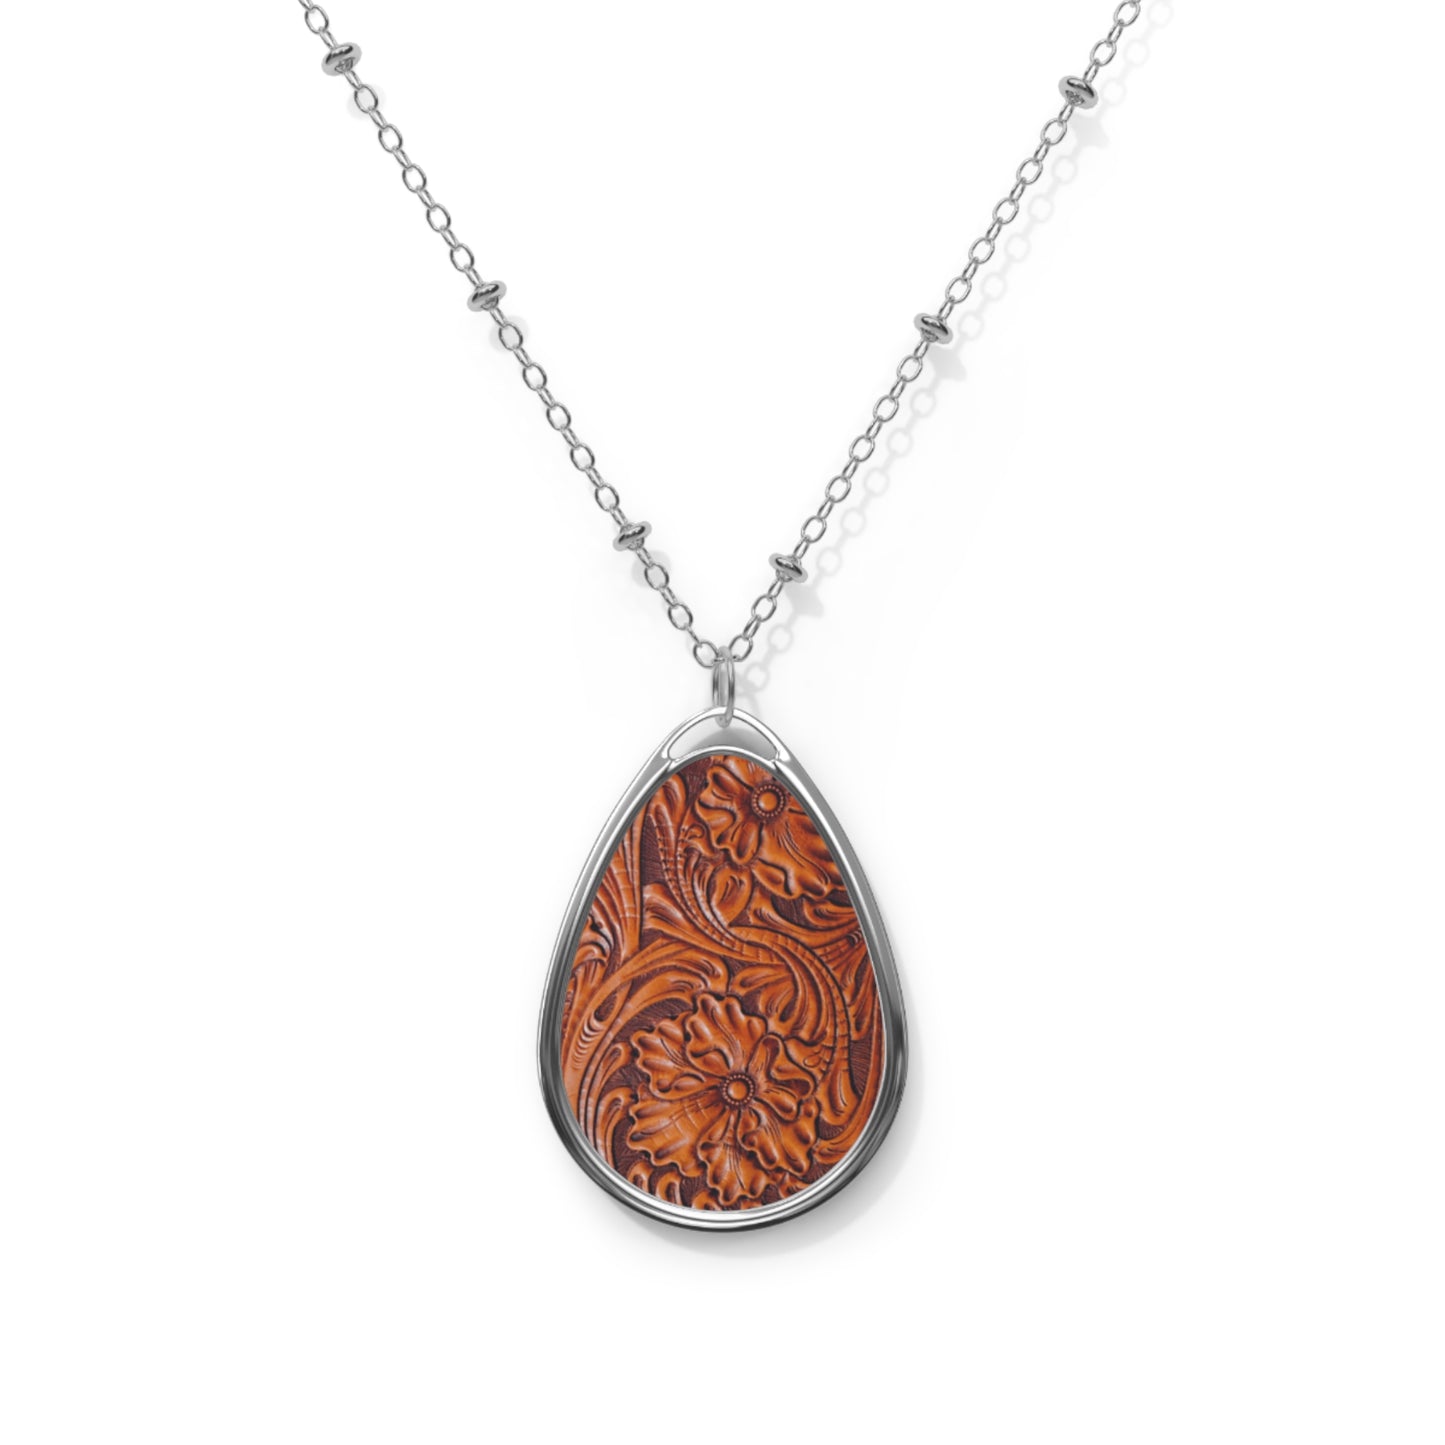 Brandy Blossom | Cowgirl Tooled Leather Print Pendant Necklace